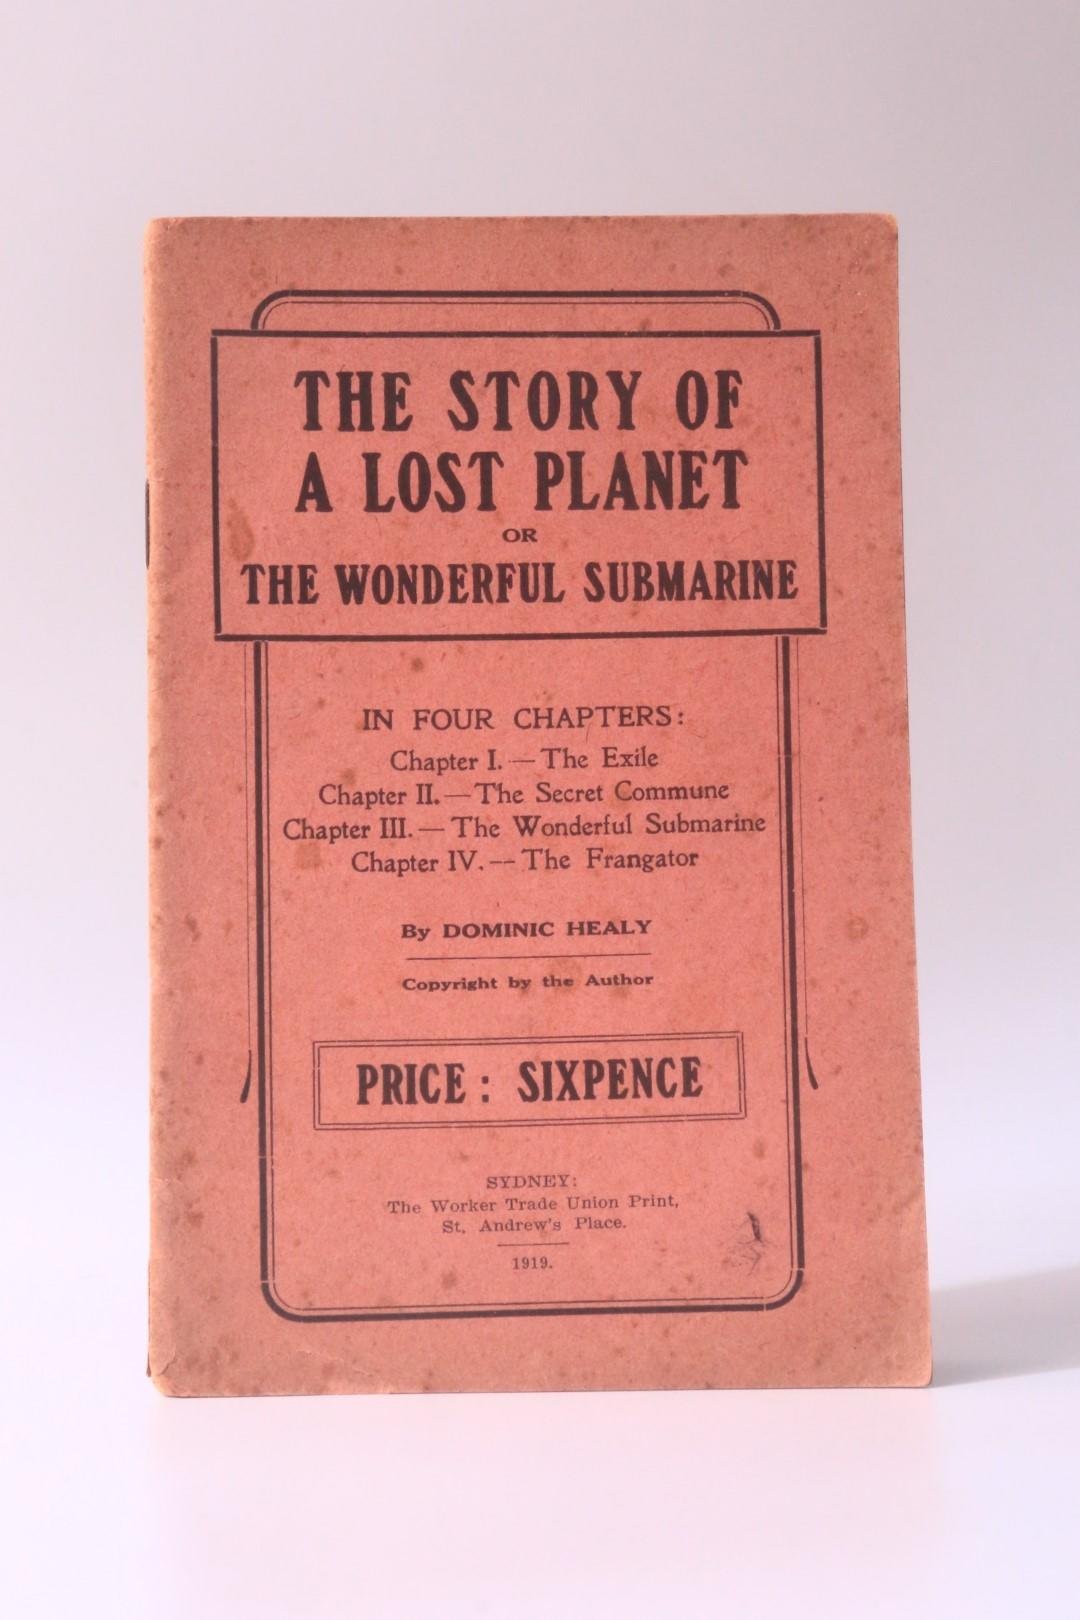 Dominic Healy - The Story of a Lost Planet or the Wonderful Submarine - The Worker Trade Union Print, 1919, First Edition.